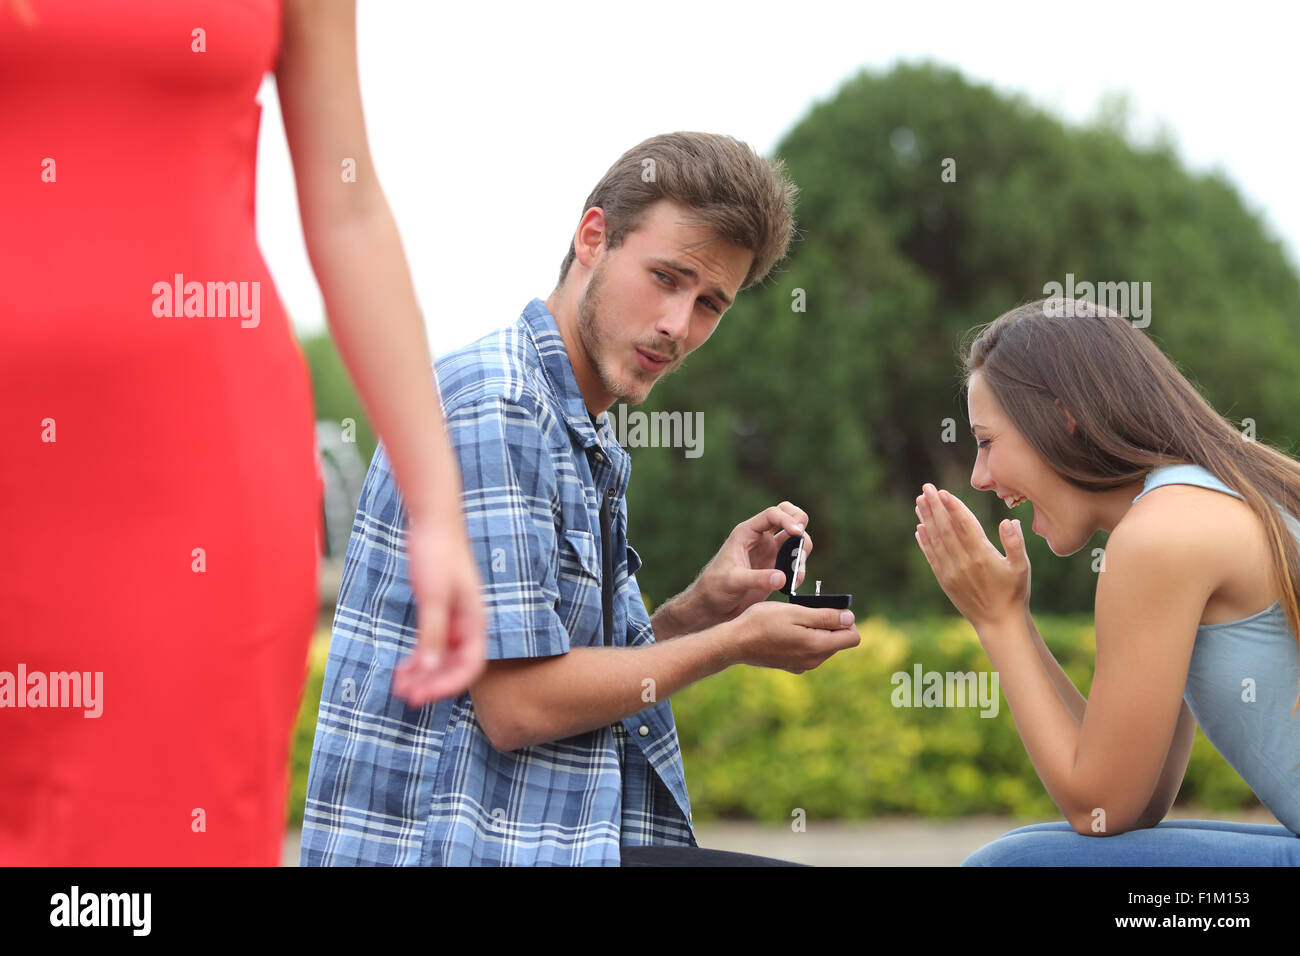 Cheater man cheating during a marriage proposal with his innocent girlfriend Stock Photo